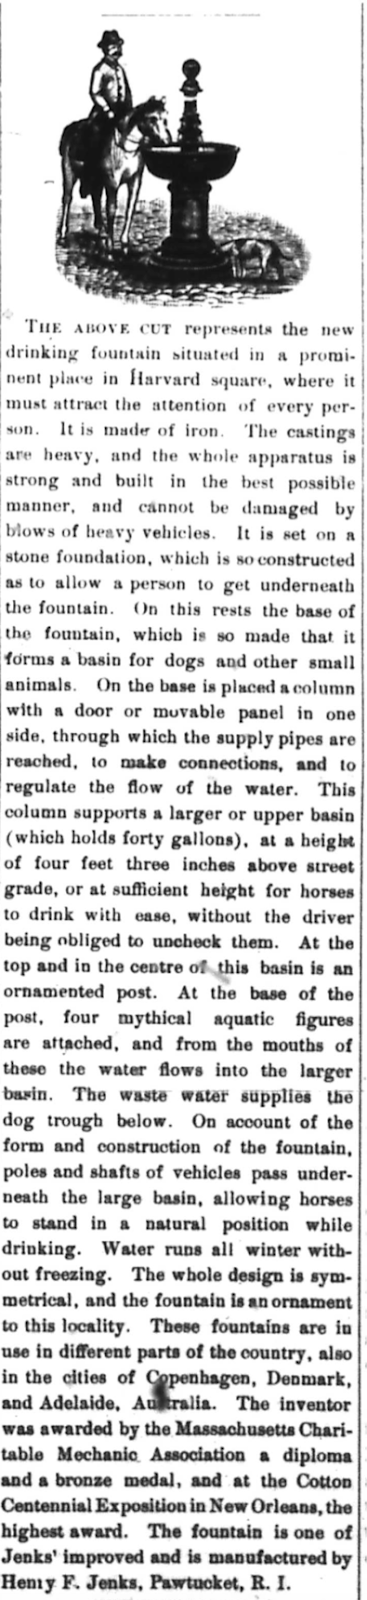 Brookline Chronicle article about Harvard Square fountain, 1887